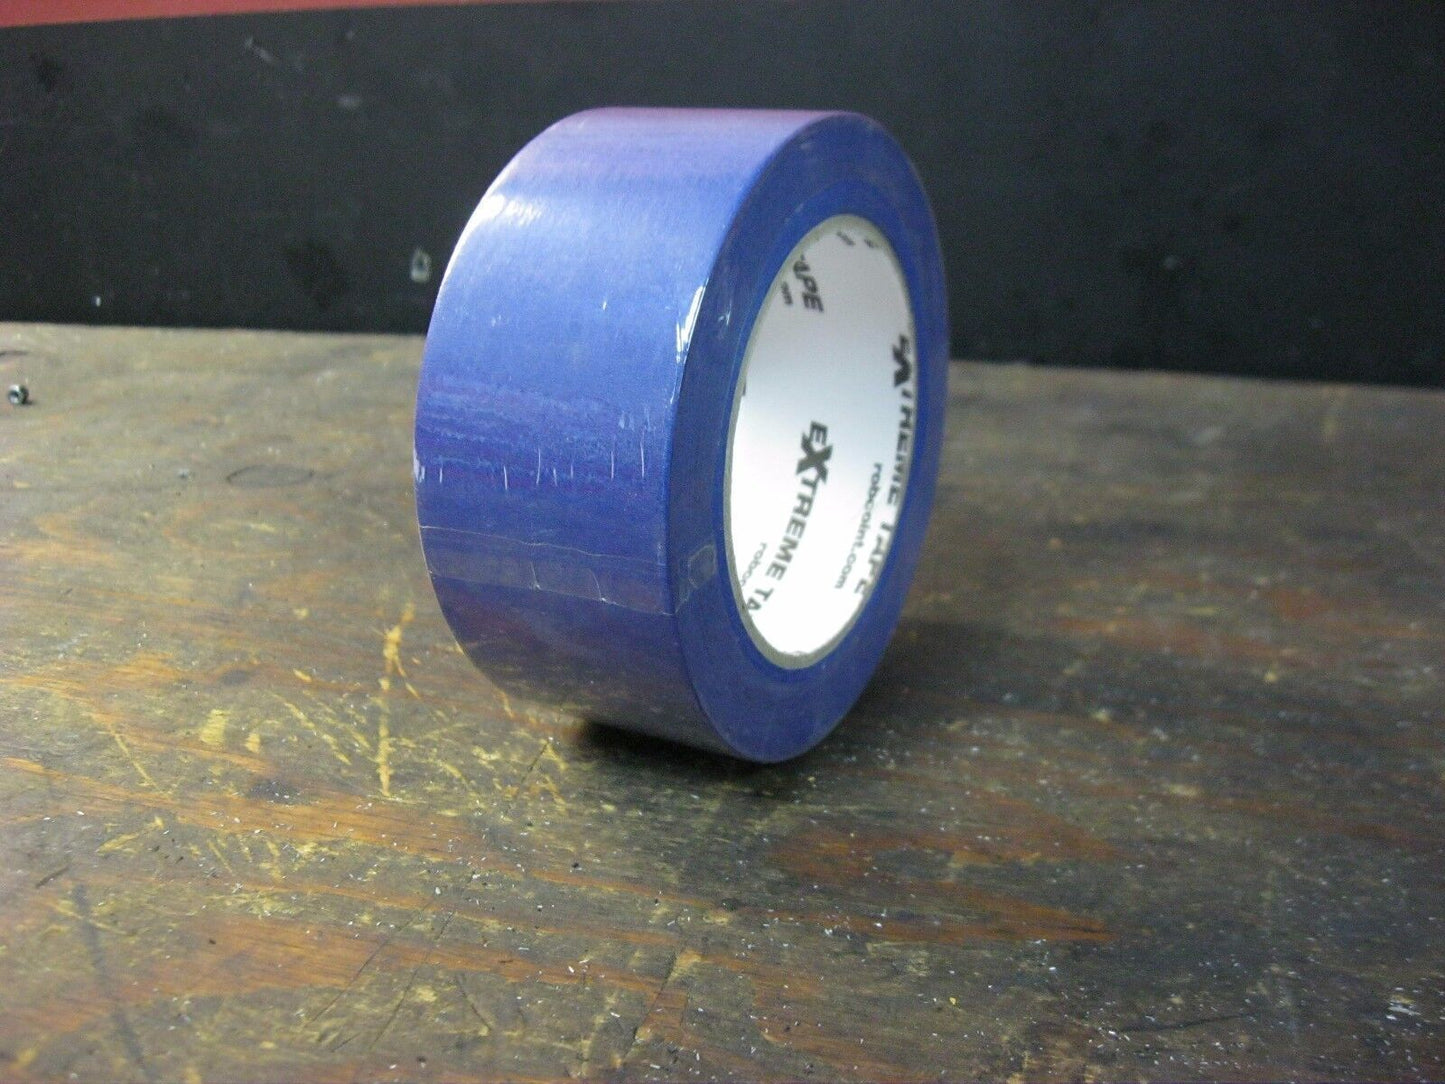 9 ROLLS BLUE 14 DAY PAINTERS TAPE 48 MM WIDE x 55M (180 FT)